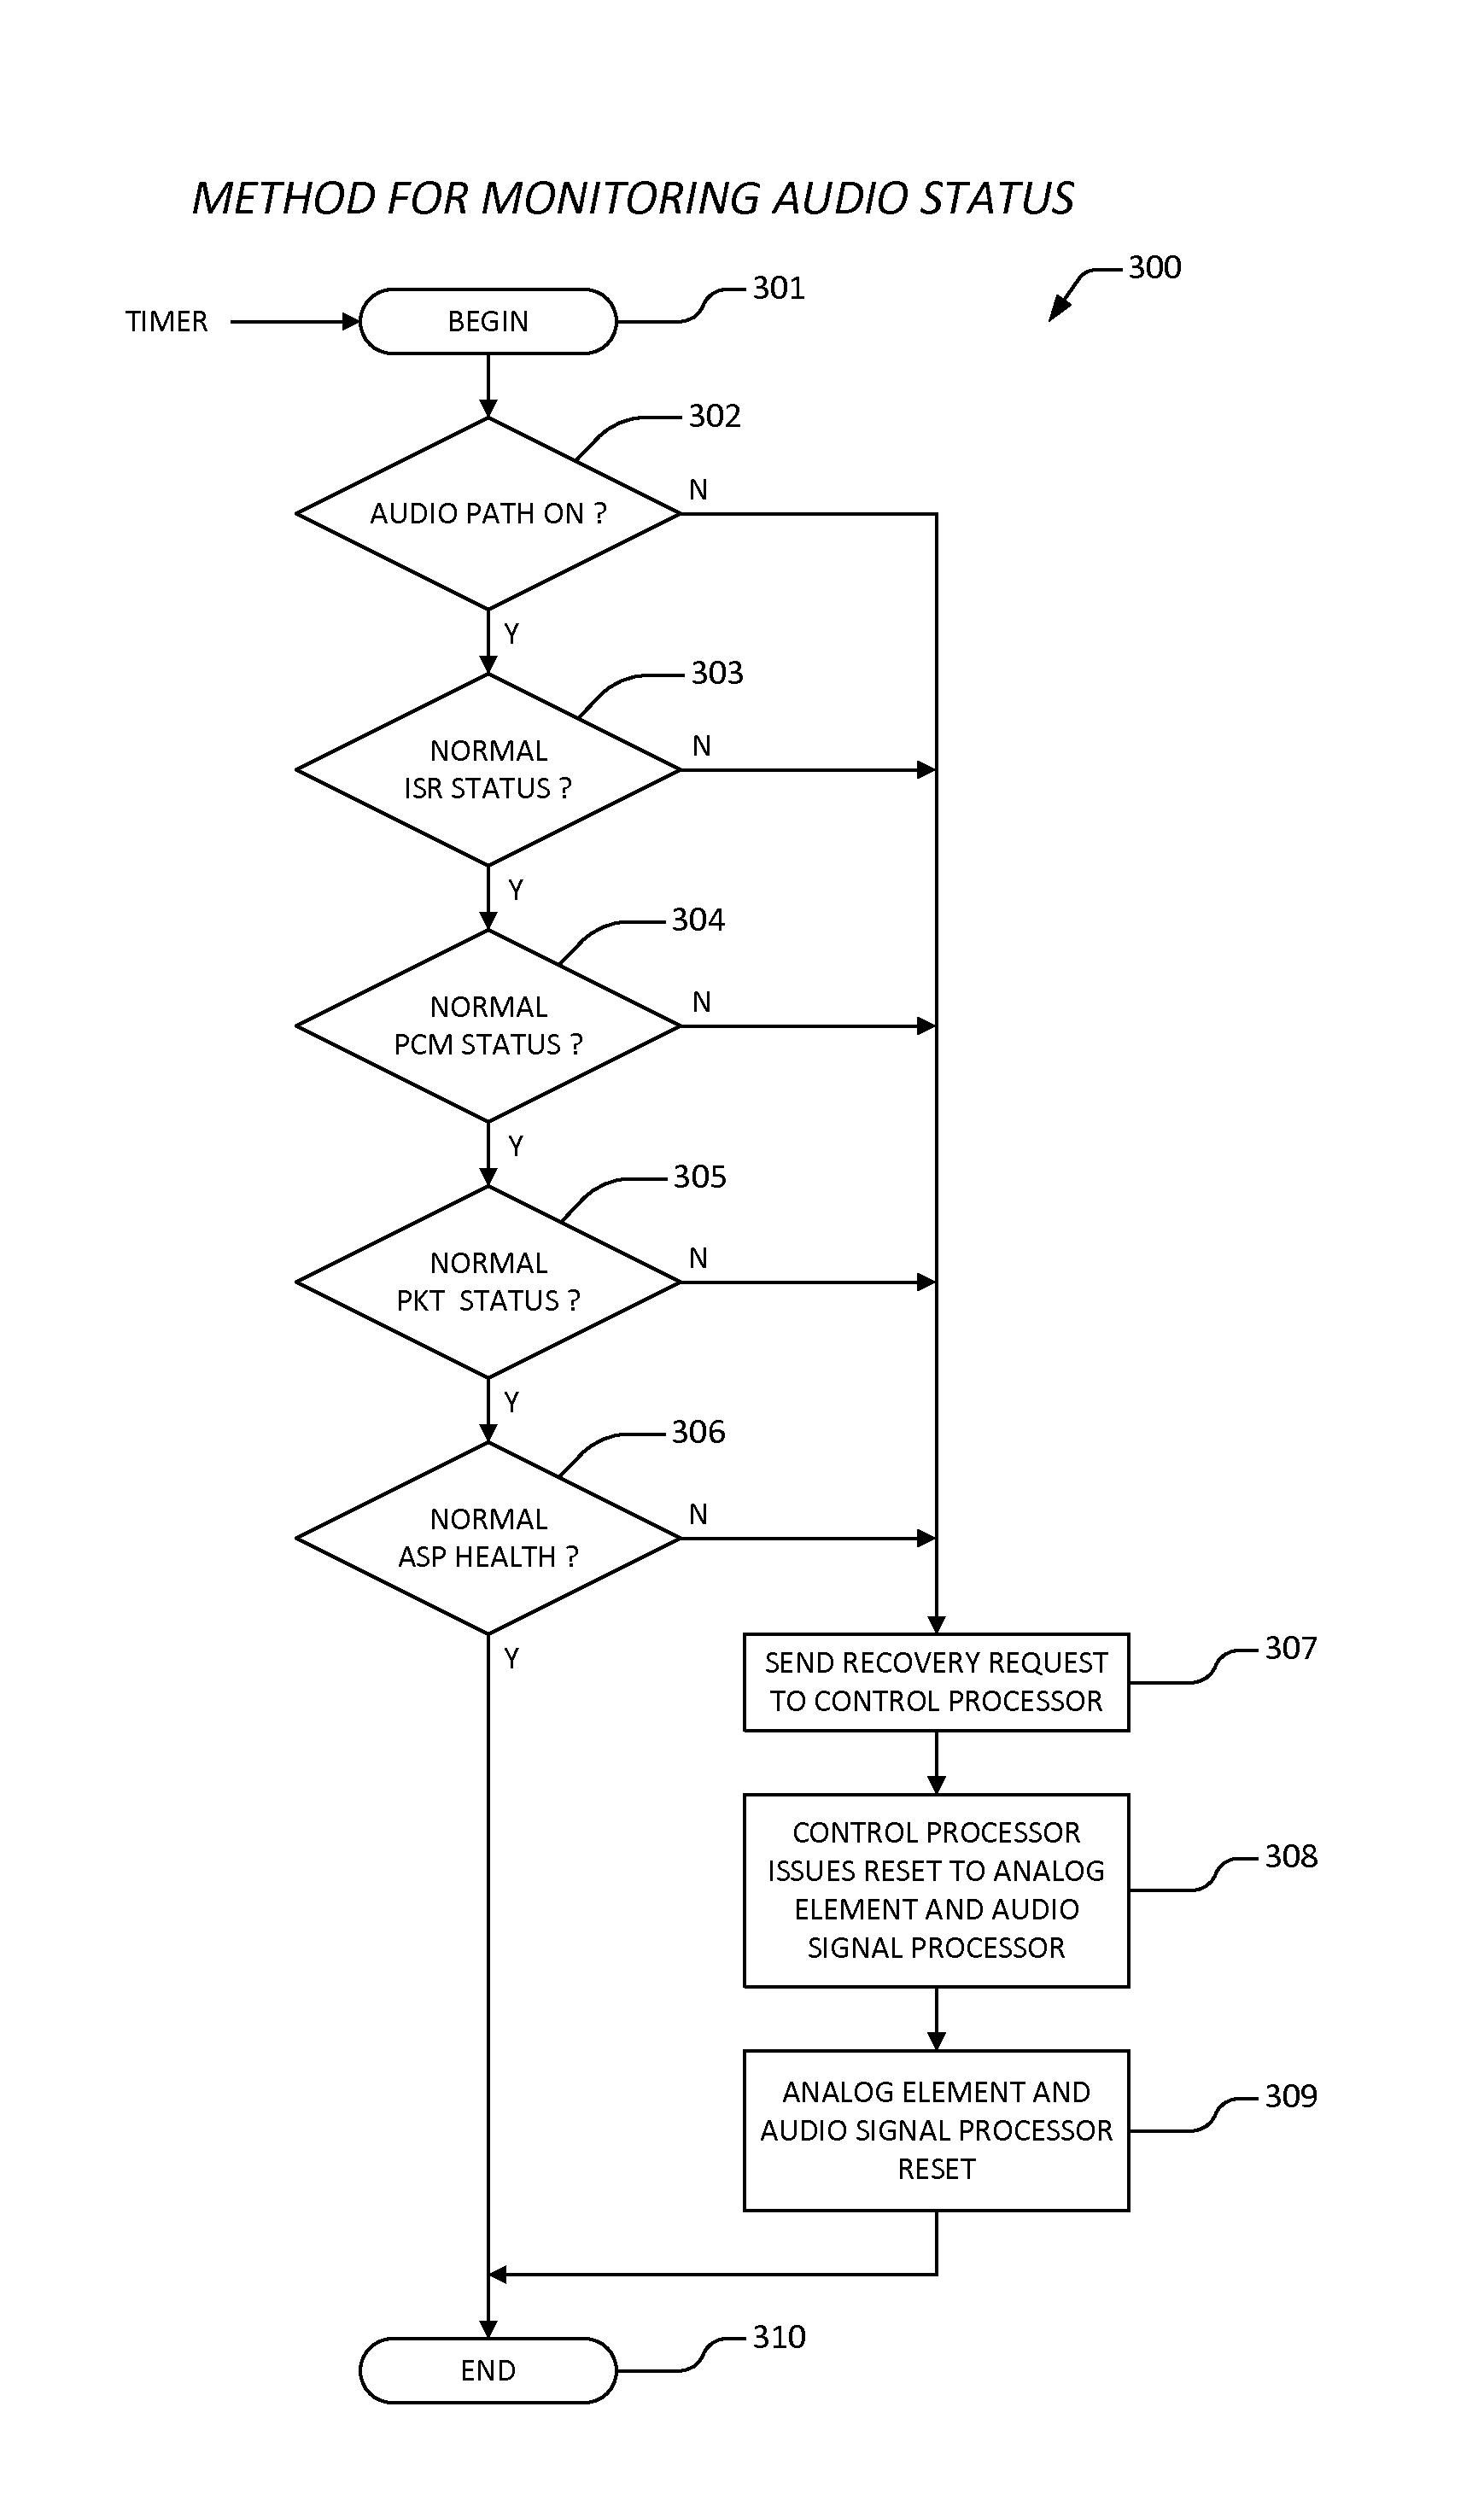 Apparatus and method for automatic audio system and recovery from unexpected behaviors